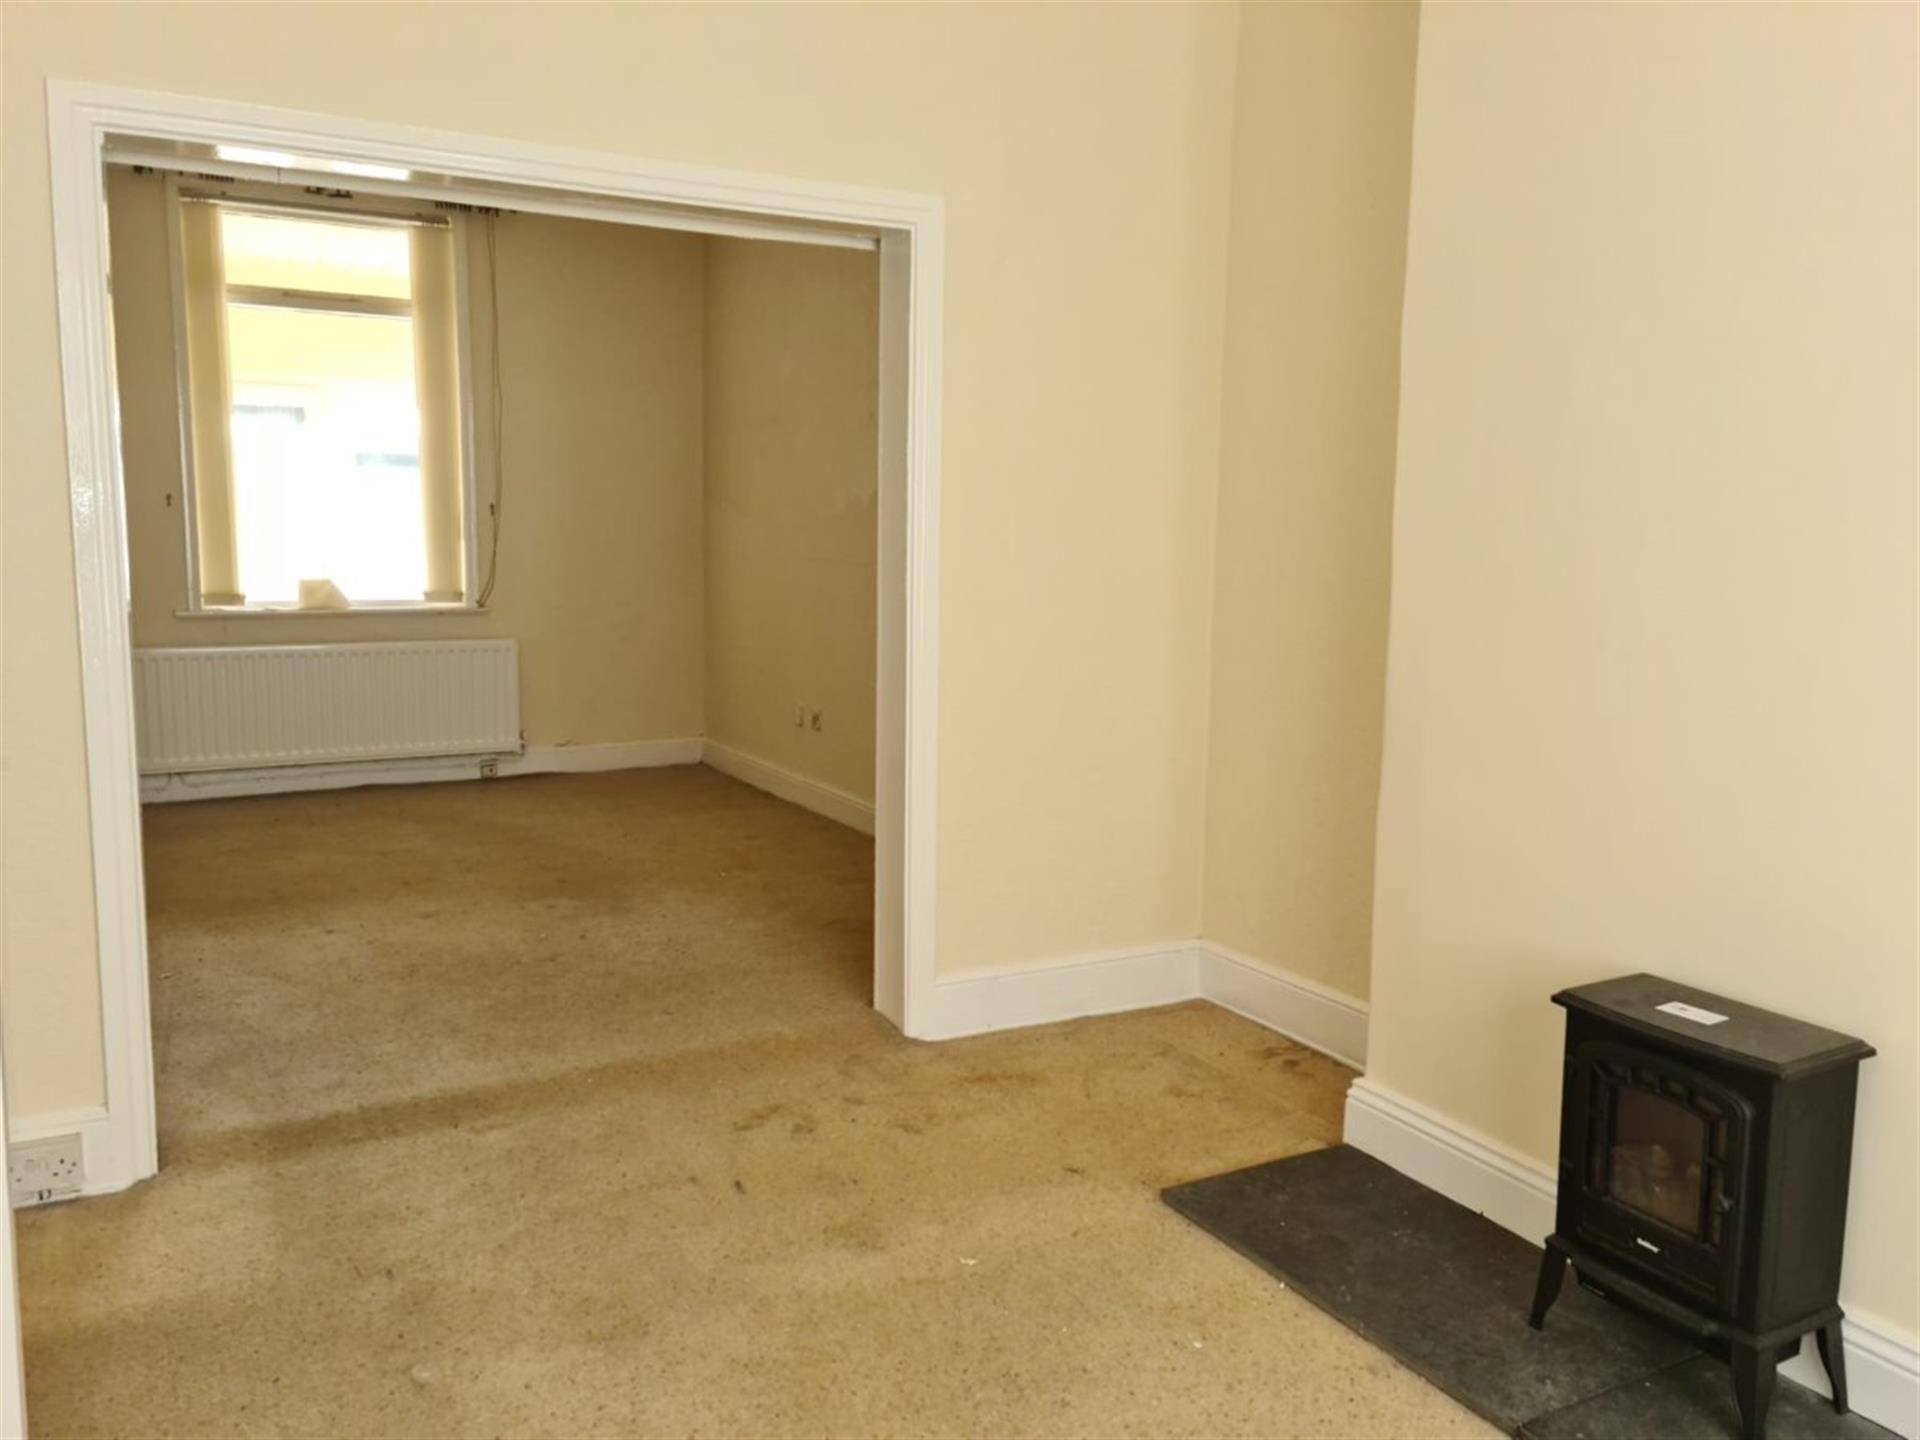 2 bedroom terraced house To Let in Bishop Auckland - photograph 6.